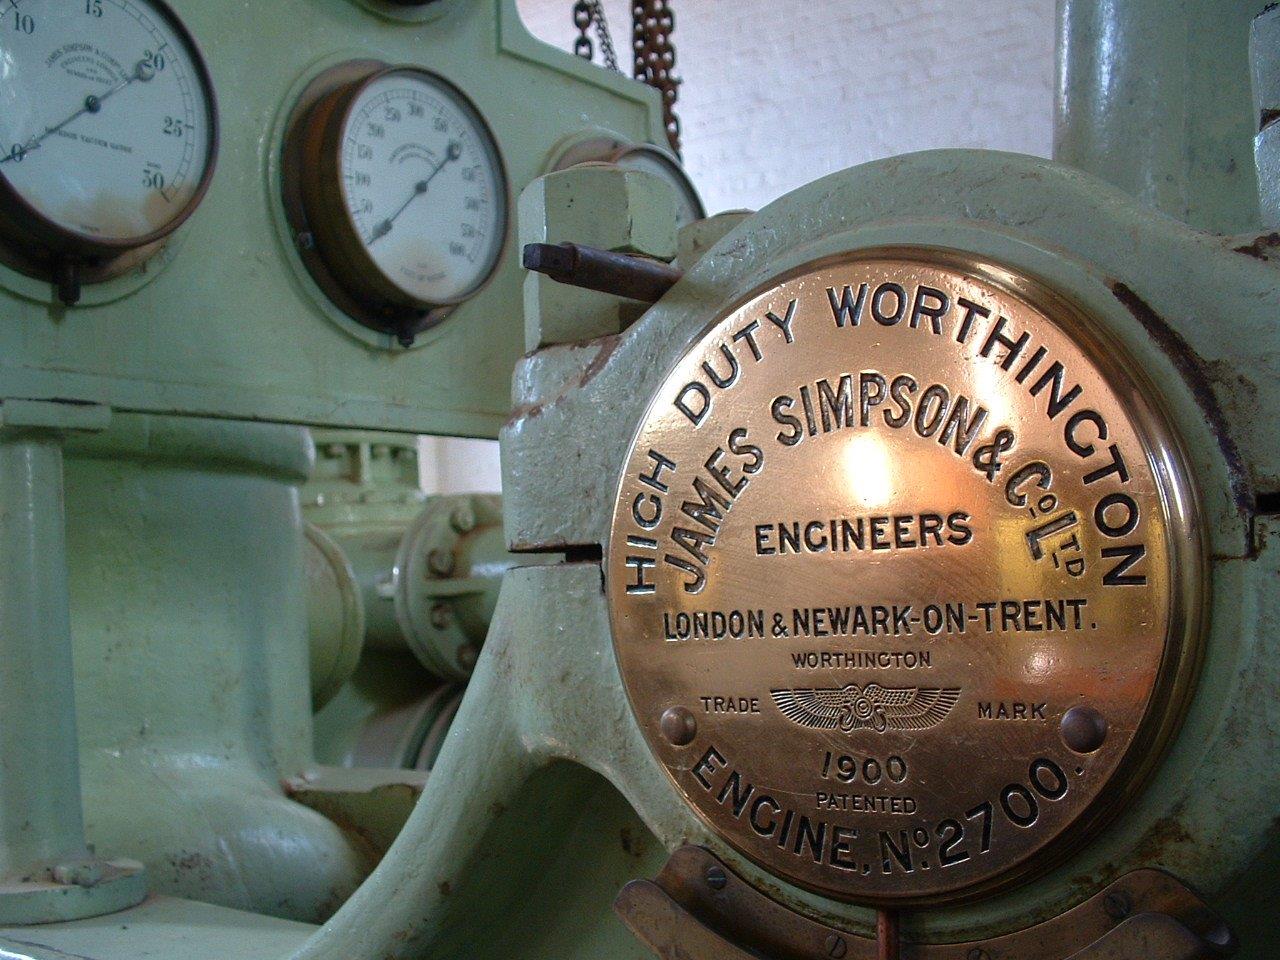 Each engine has a trademark of the supplier's details.  This engine was made by James Simpson & Co in 1900, with the stunning lime green engine in the background. 